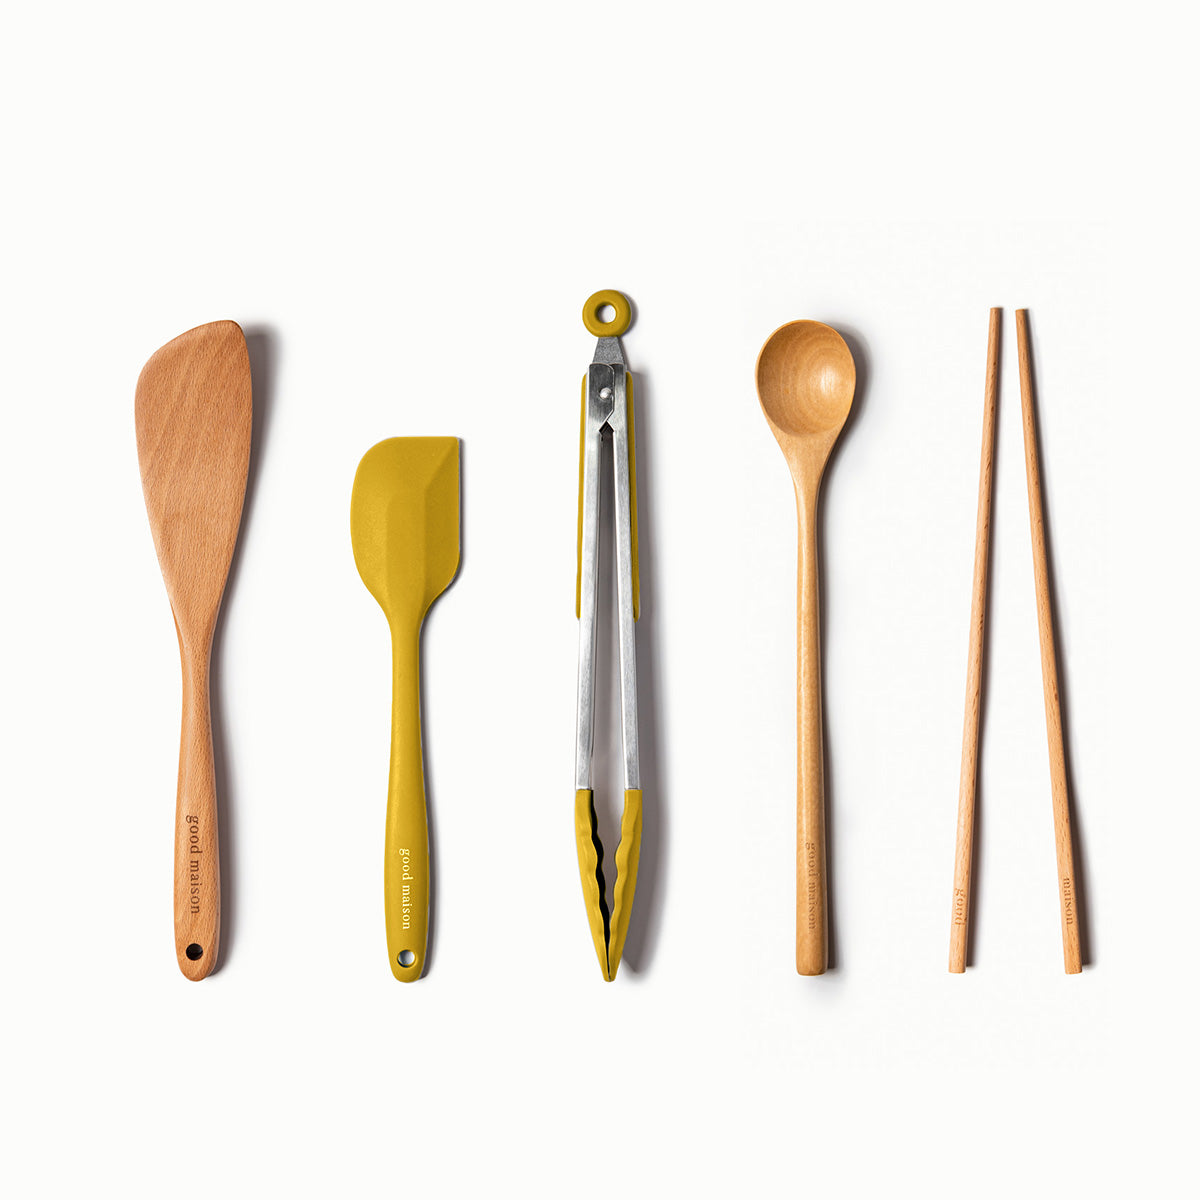 The Essential Cooking Tools